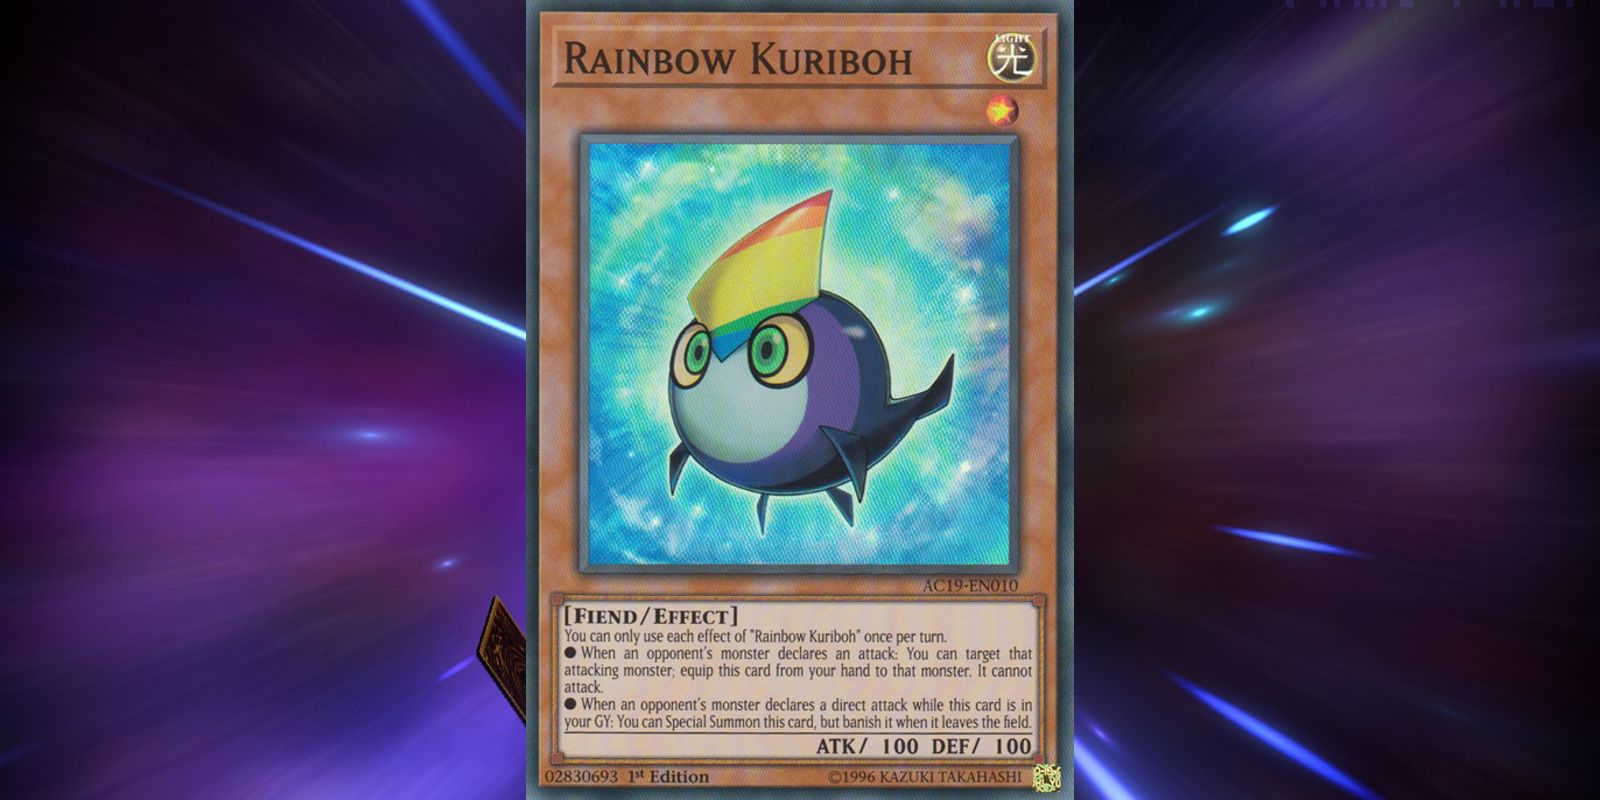 Rainbow Kuriboh equips to an opponent's monster in Yu-Gi-Oh! Master Duel.